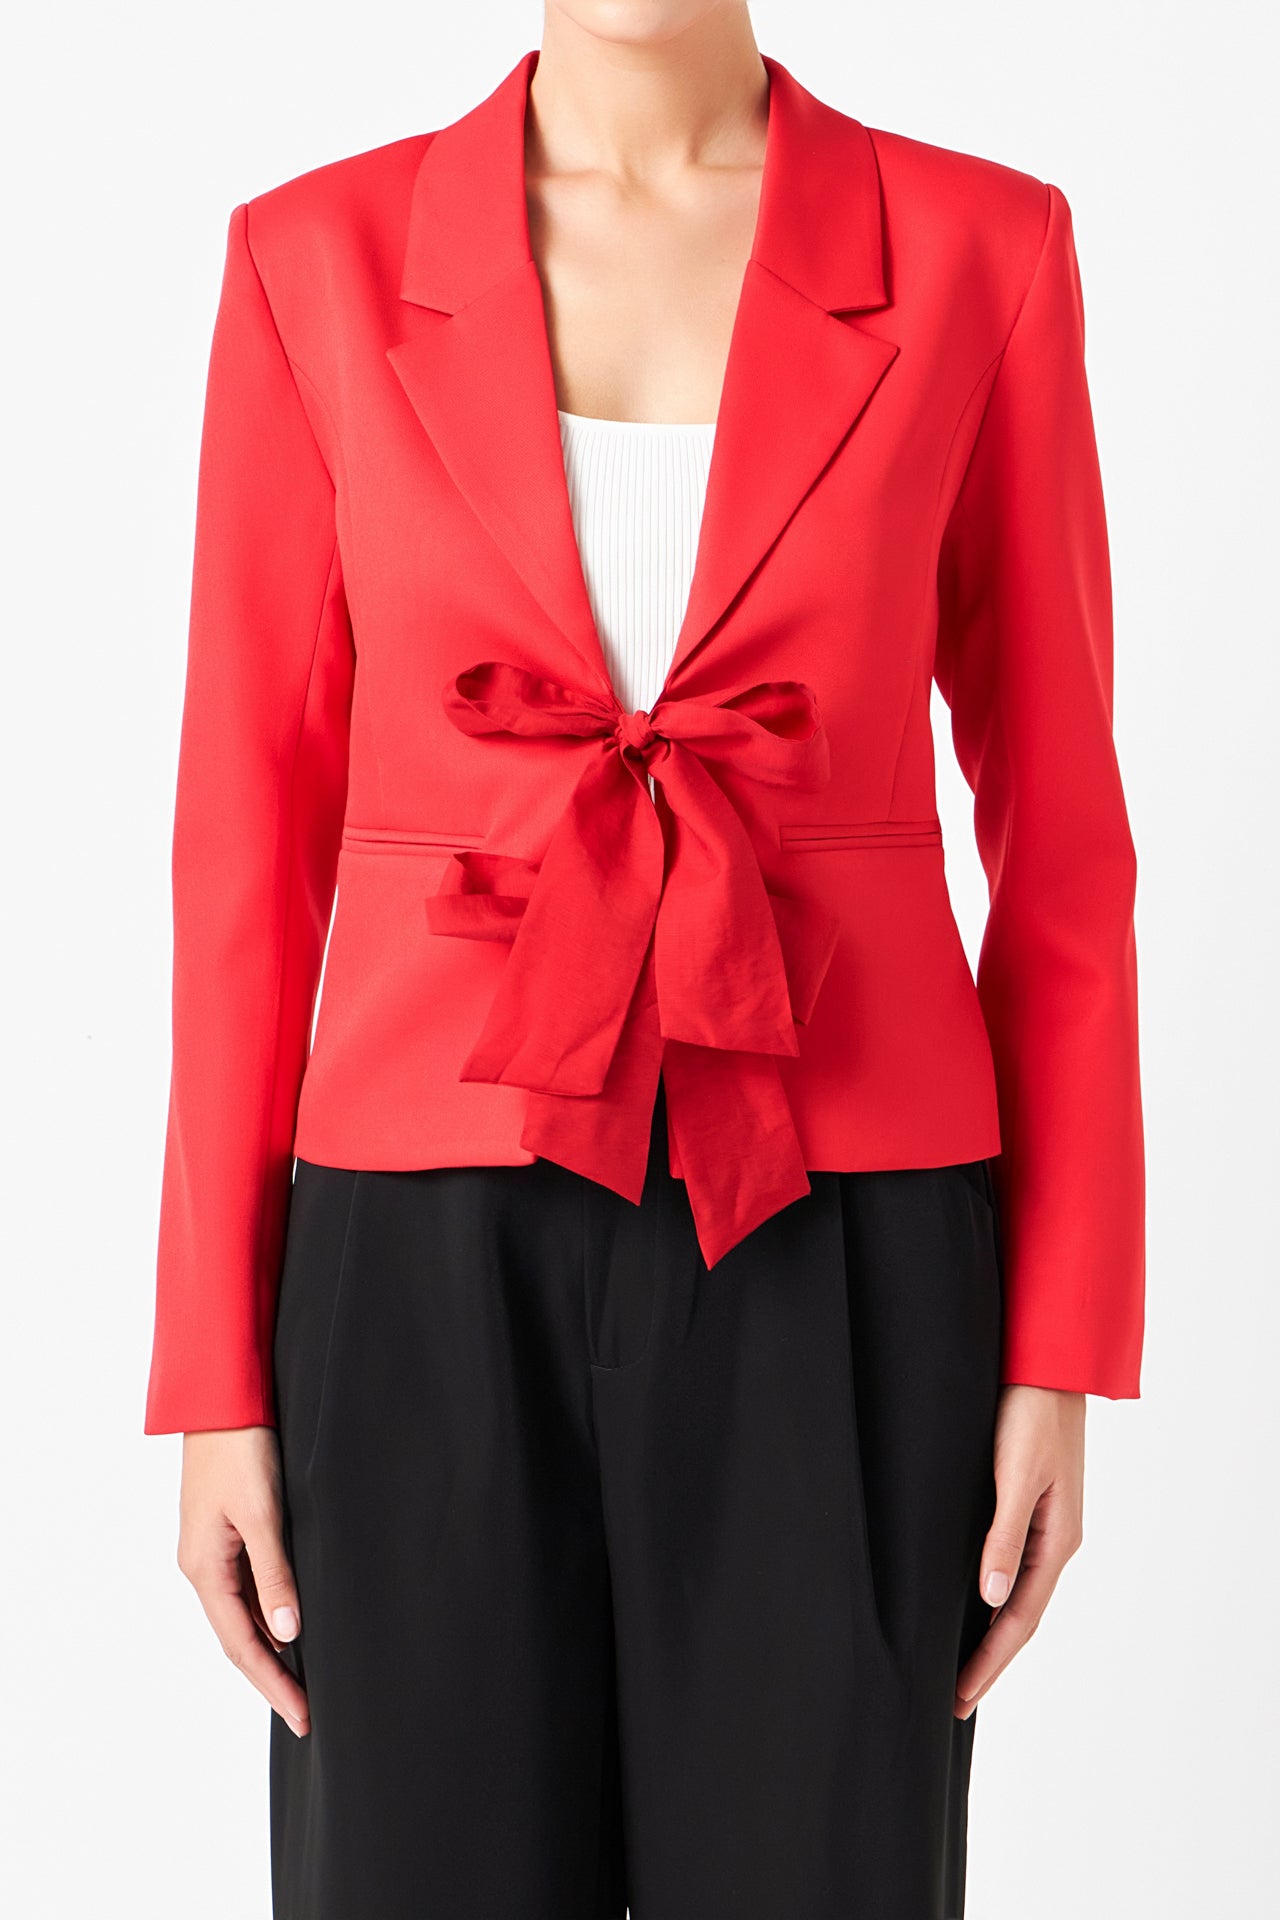 Endless Rose - Bow Contrast Blazer - Blazers in Women's Clothing available at endlessrose.com